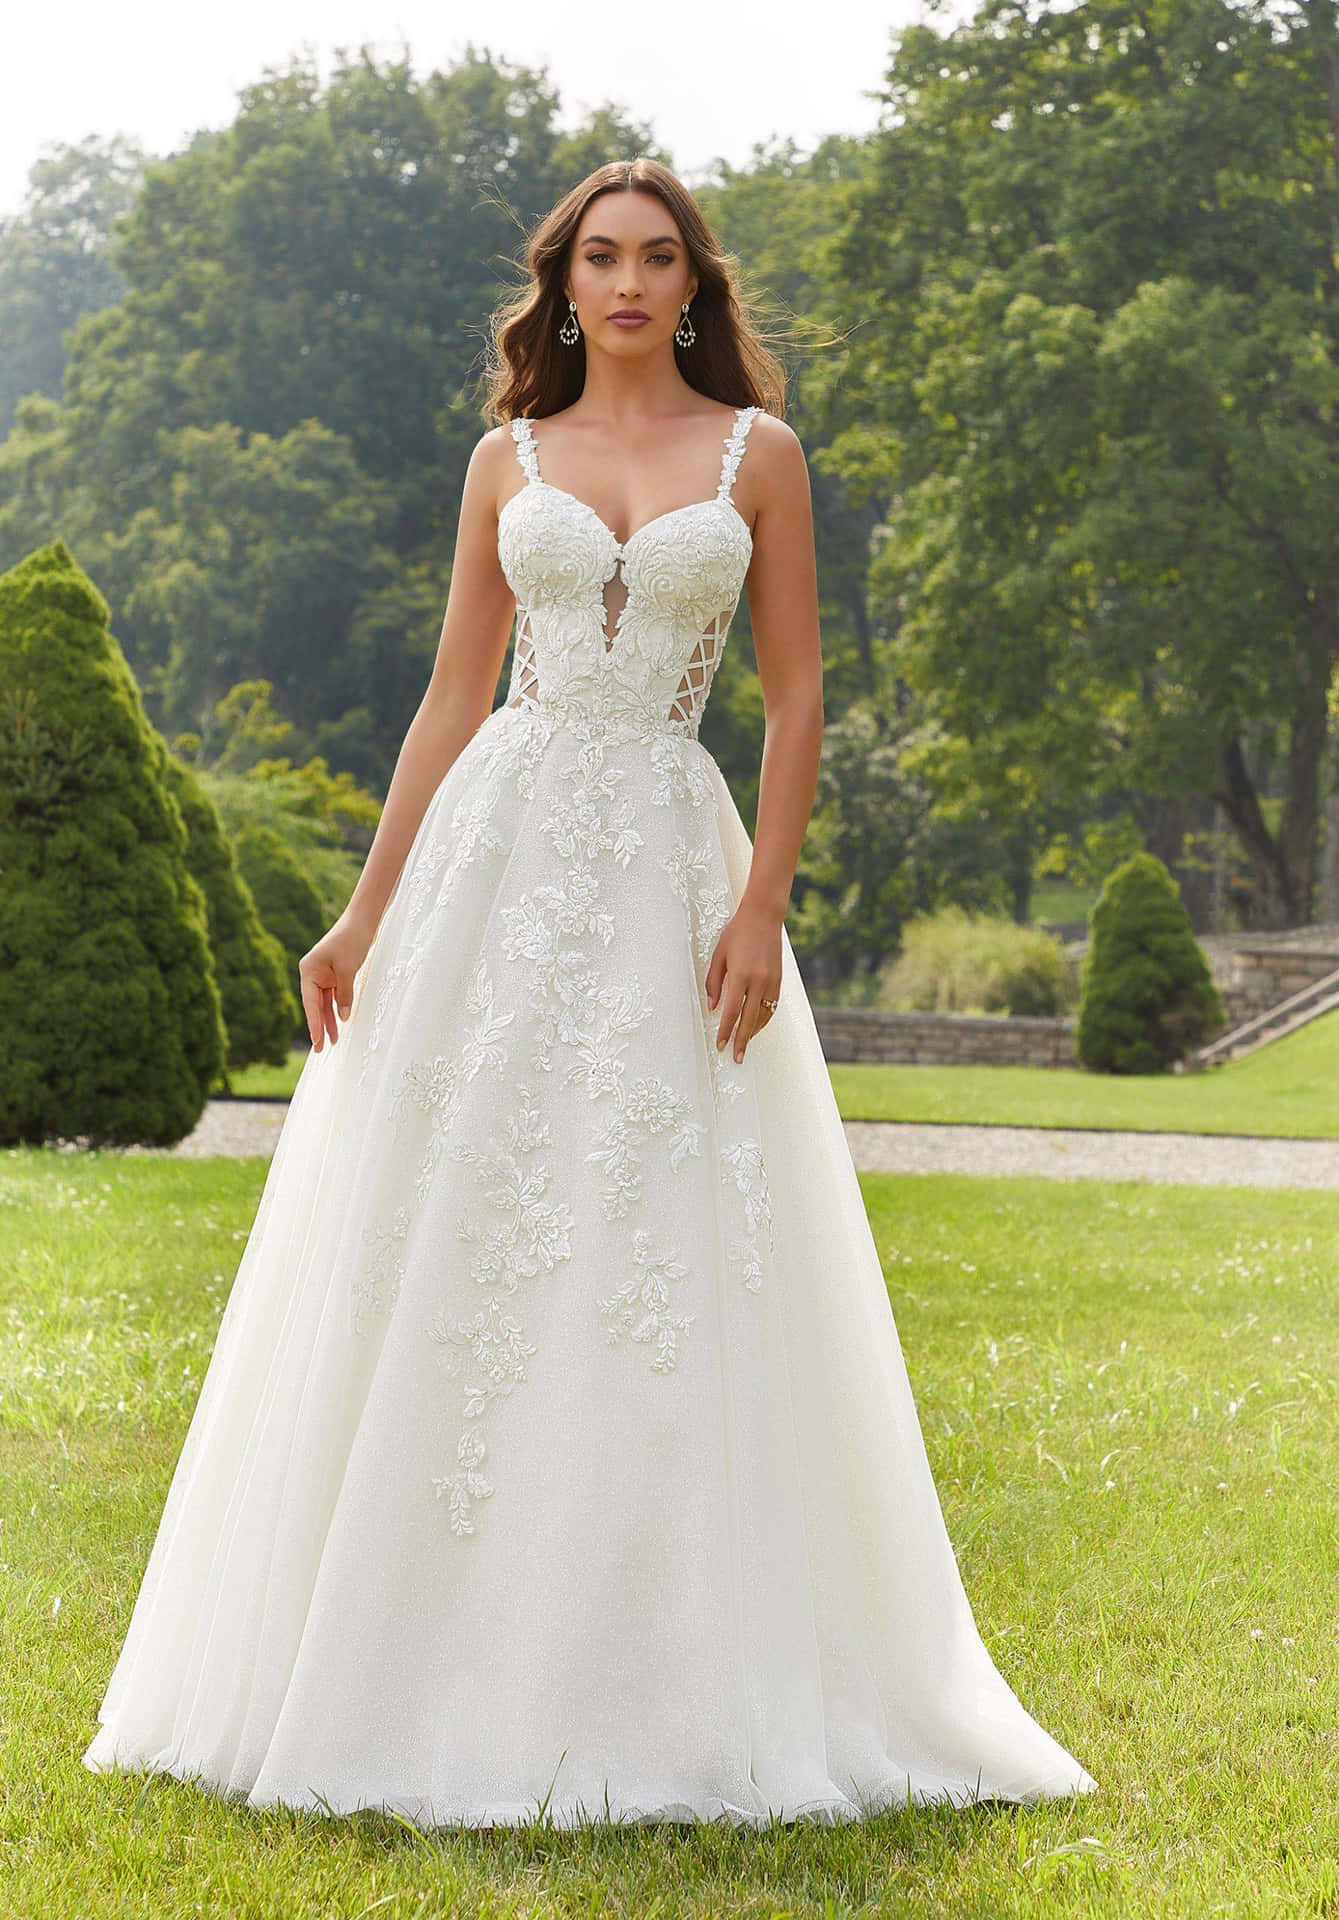 A gorgeous ivory and lace ball gown with a fishtail train for the perfect bride. Wallpaper